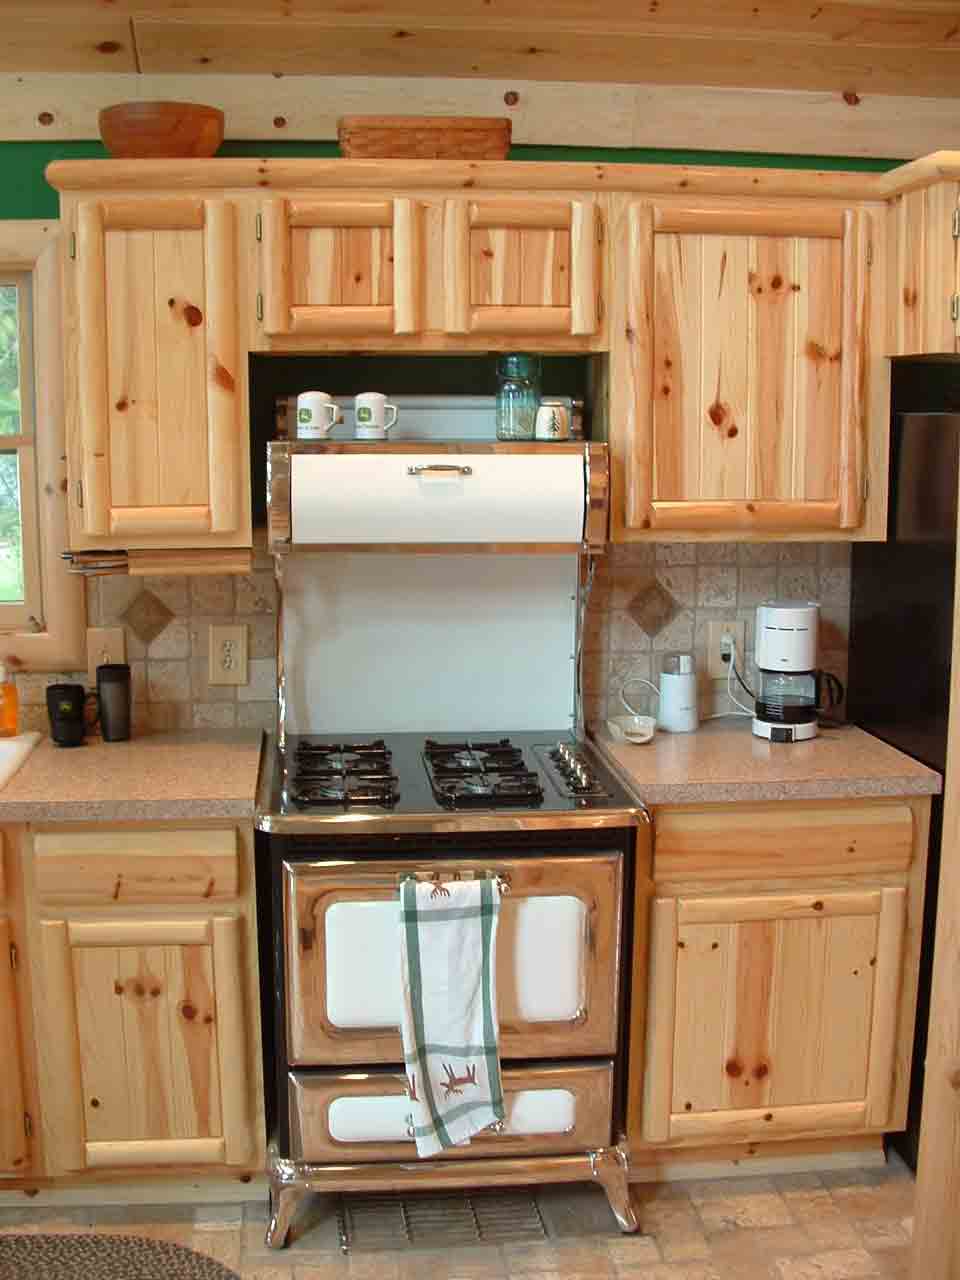 cabinets - bathrooms as well as kitchen areas|hardwood nation cabinets